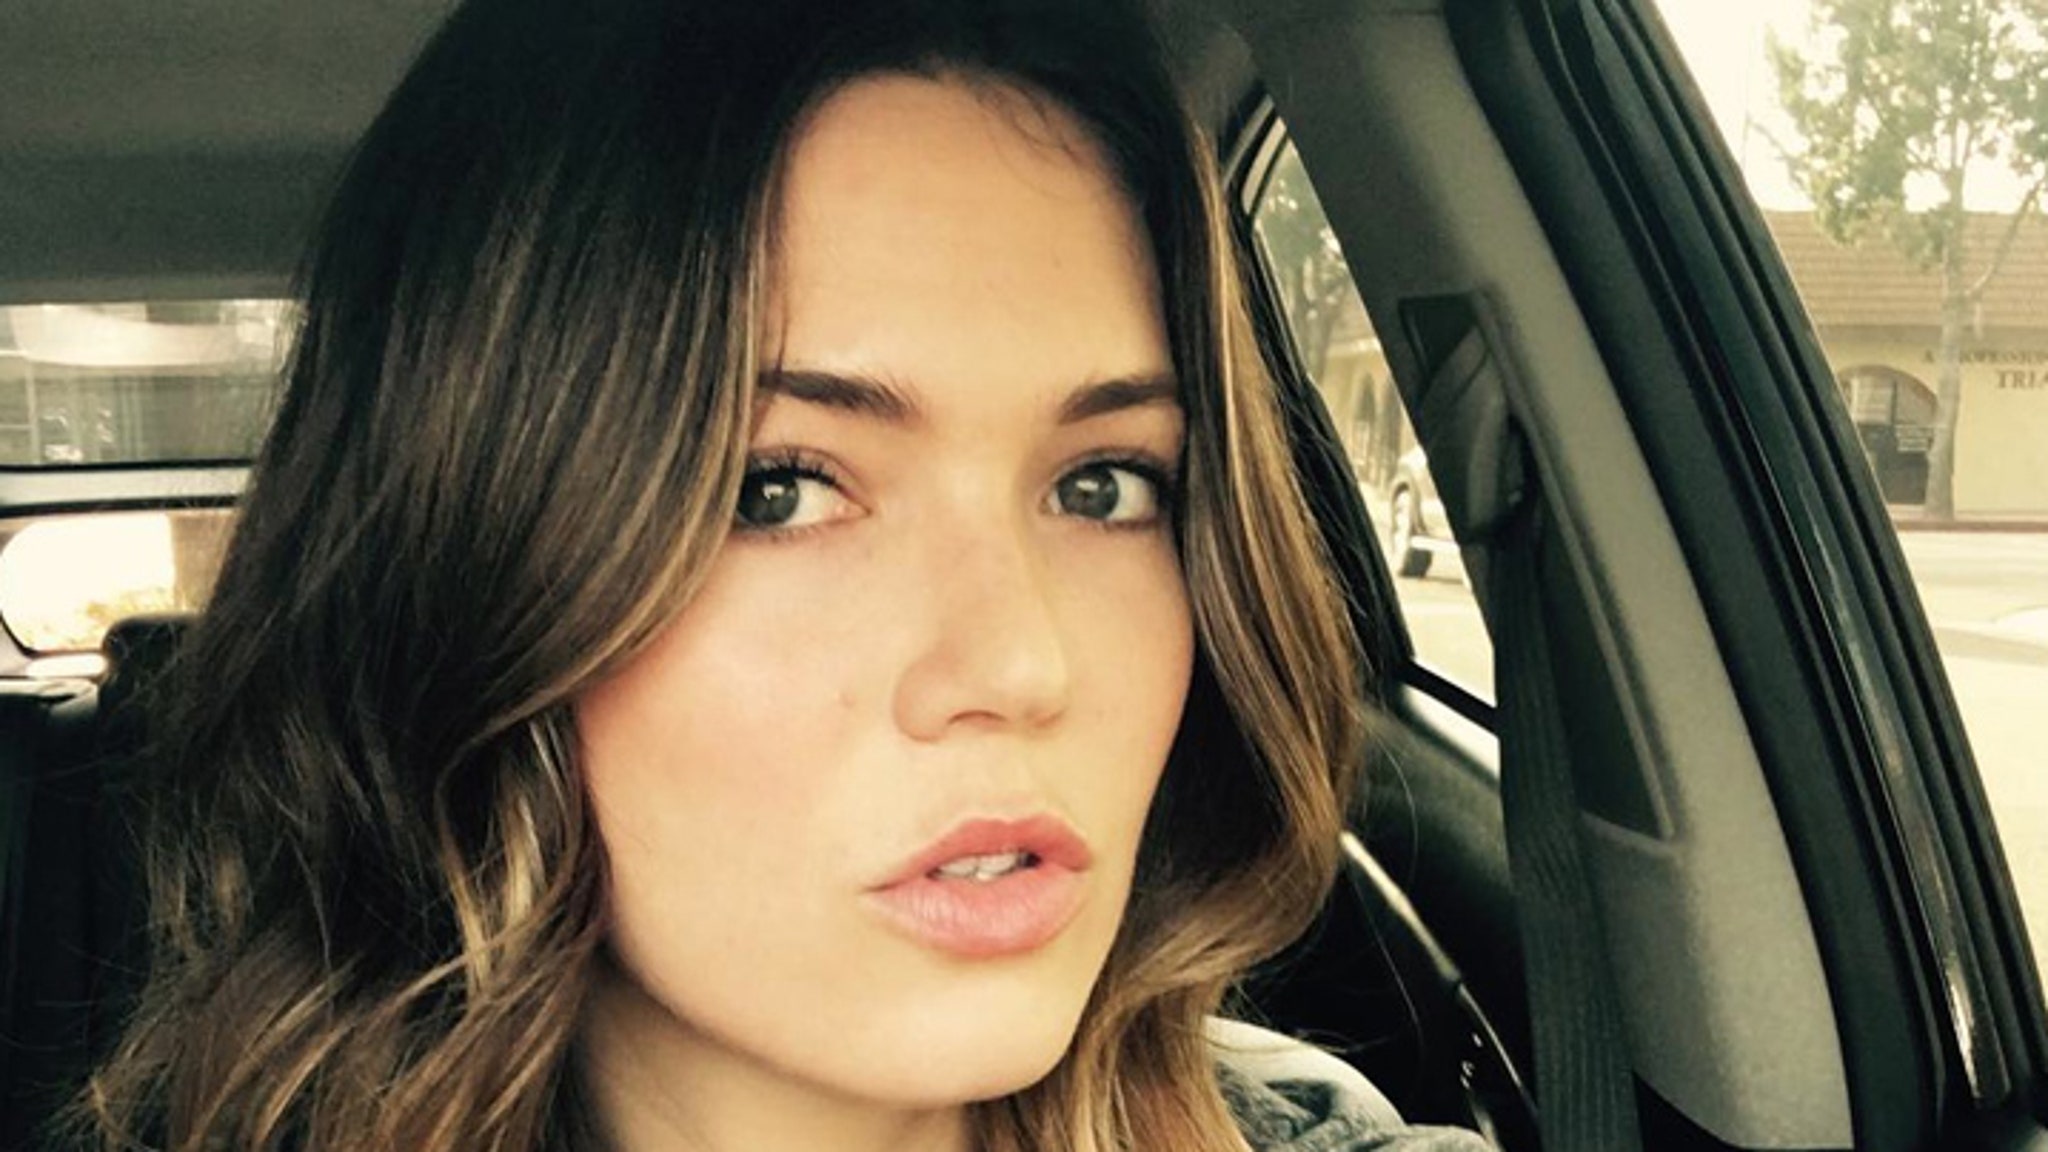 Mandy Moore Da Rejects Case Against Alleged Stalker